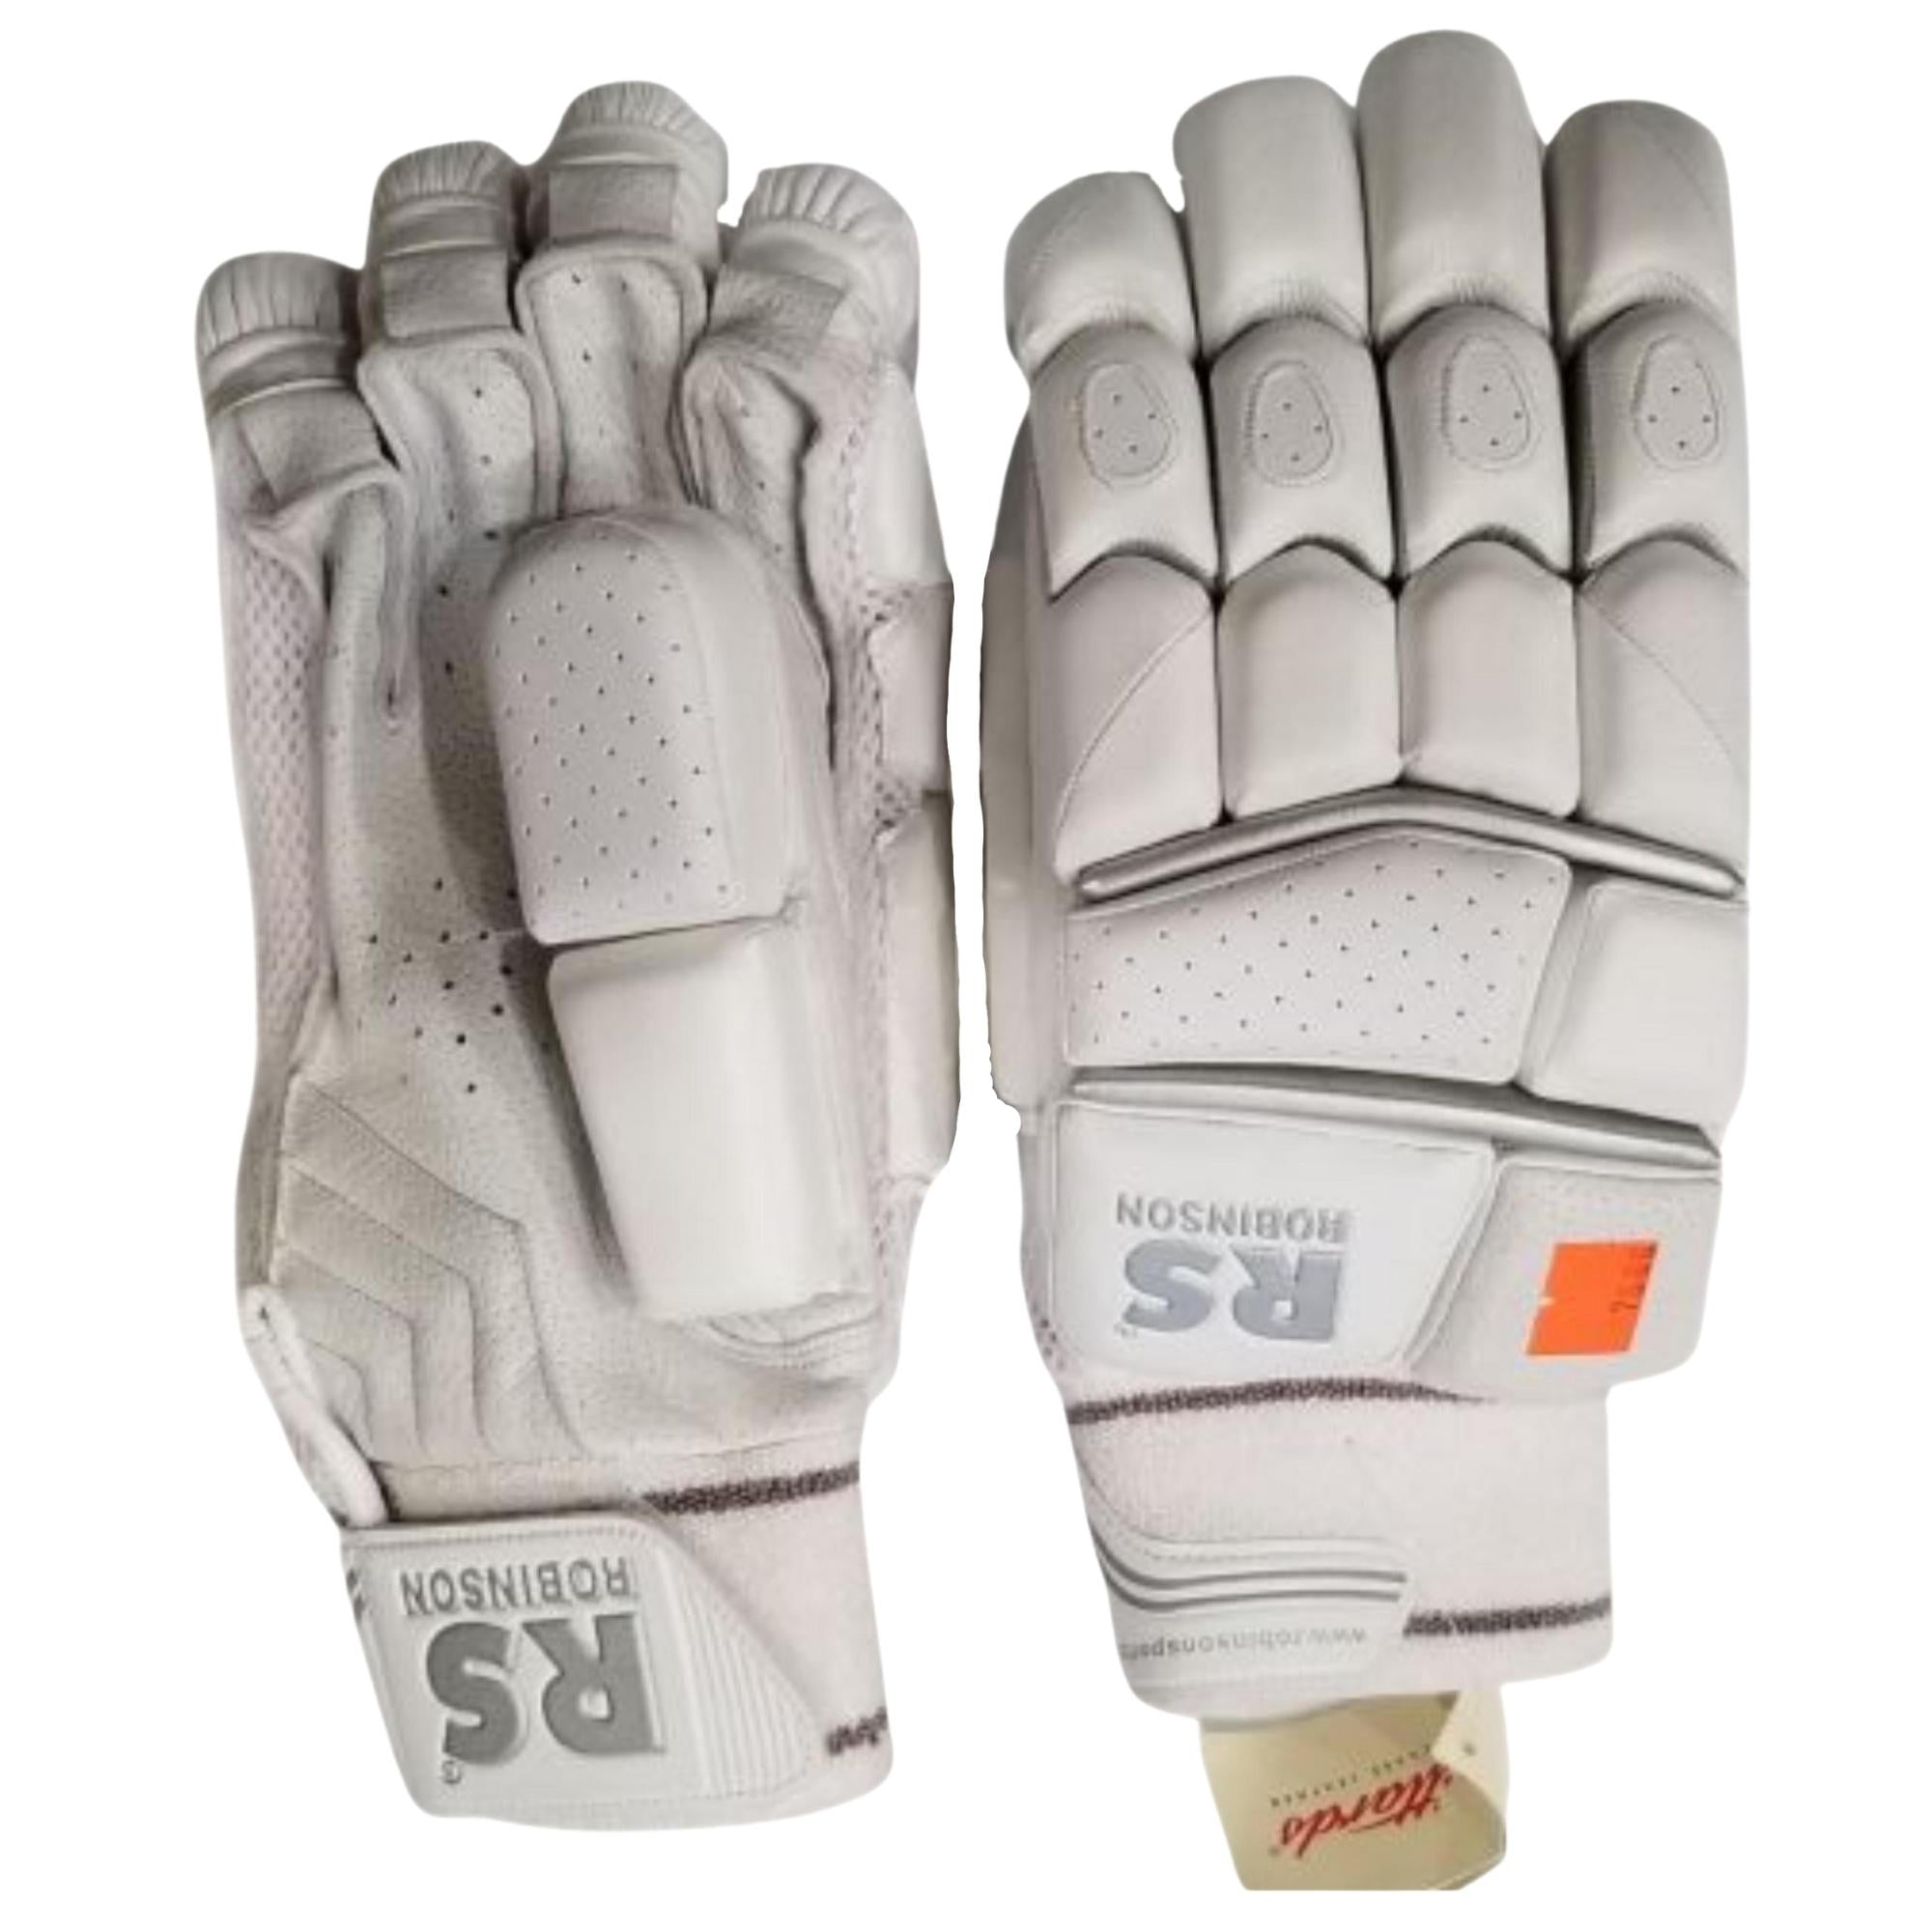 RS Limited Edition Batting Gloves